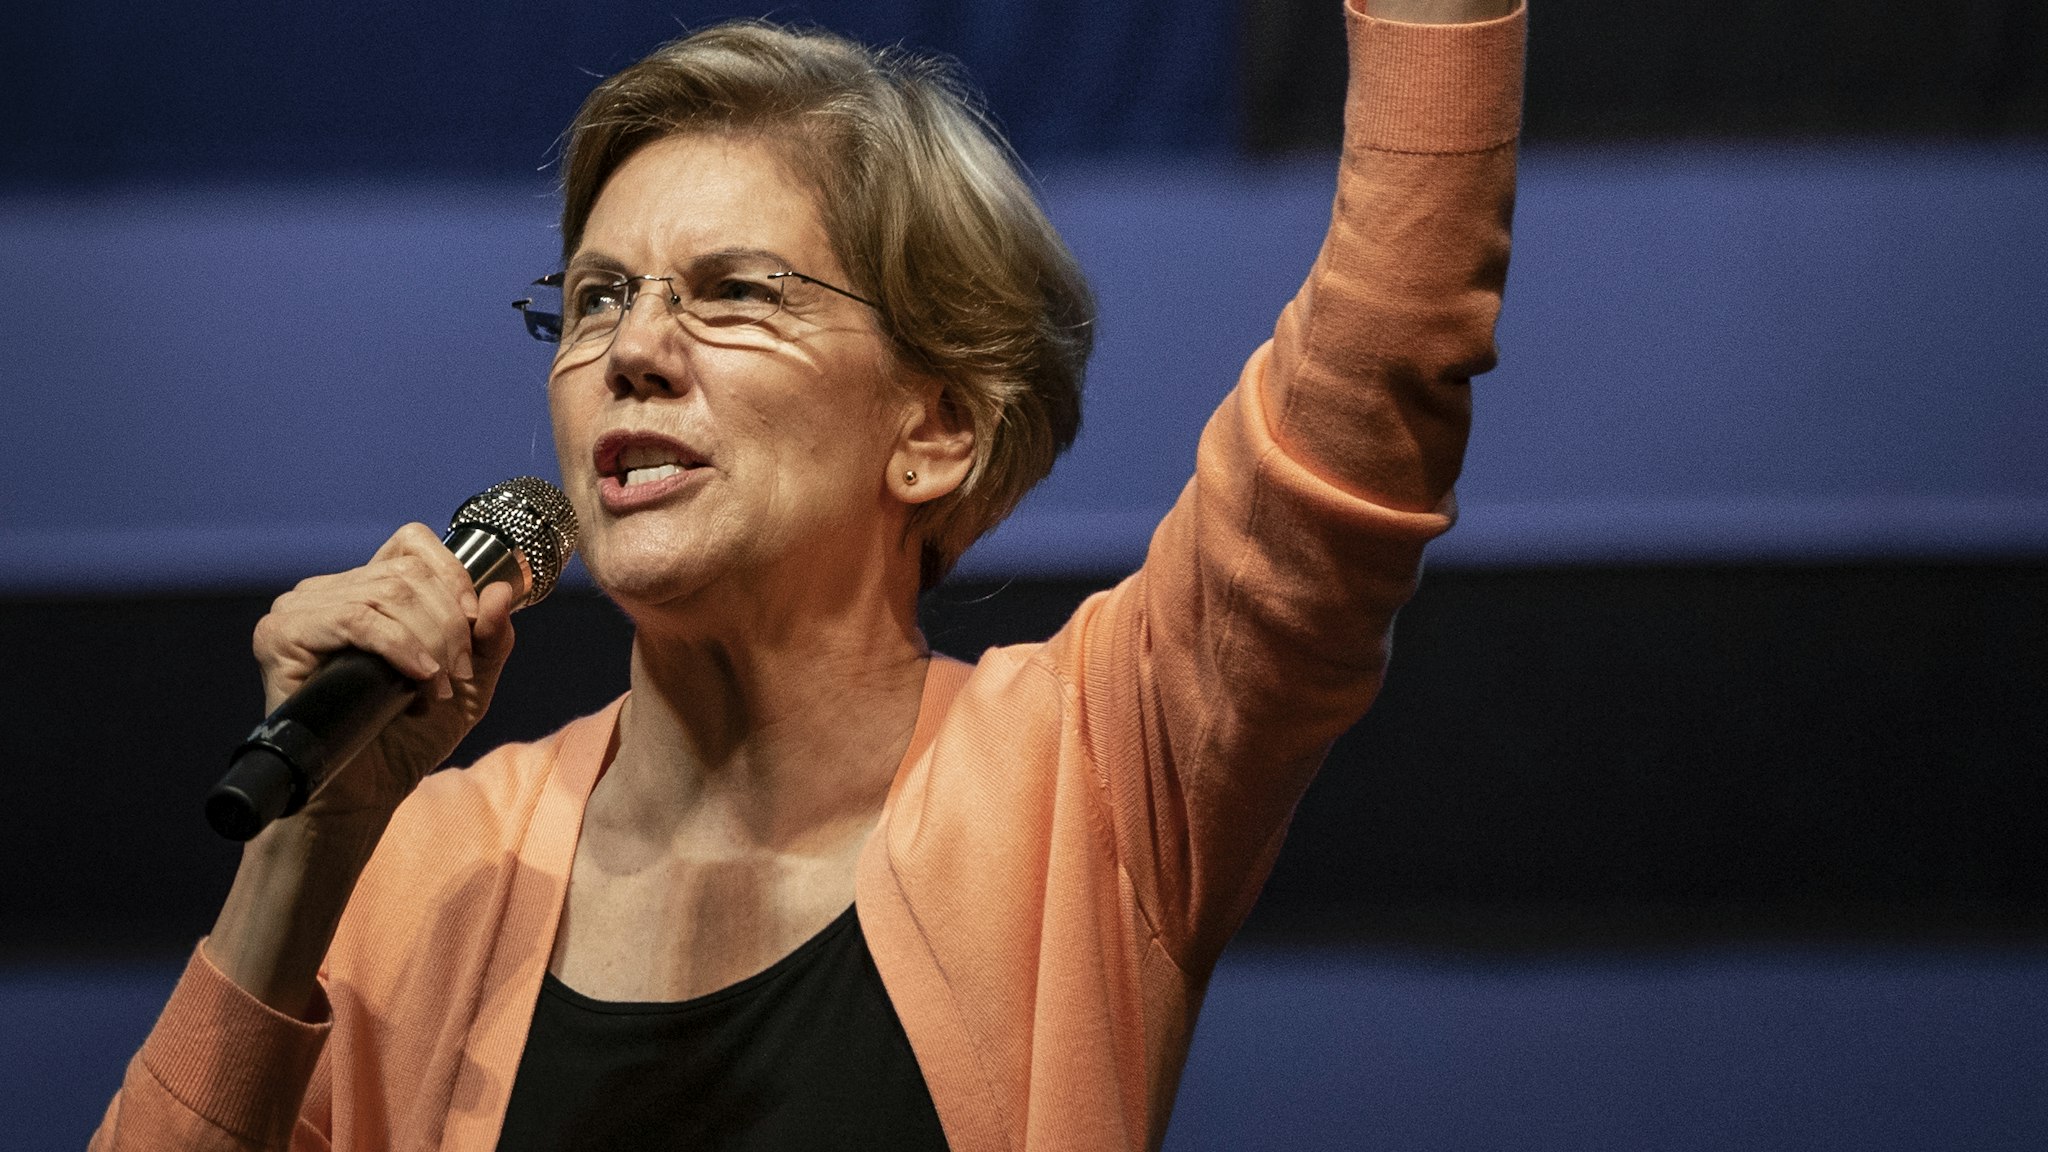 CHARLESTON, SC - FEBRUARY 26: Democratic presidential candidate Sen. Elizabeth Warren (D-MA) speaks during a campaign rally at the Charleston Music Hall on February 26, 2020 in Charleston, South Carolina. South Carolina holds its Democratic presidential primary on Saturday, February 29.